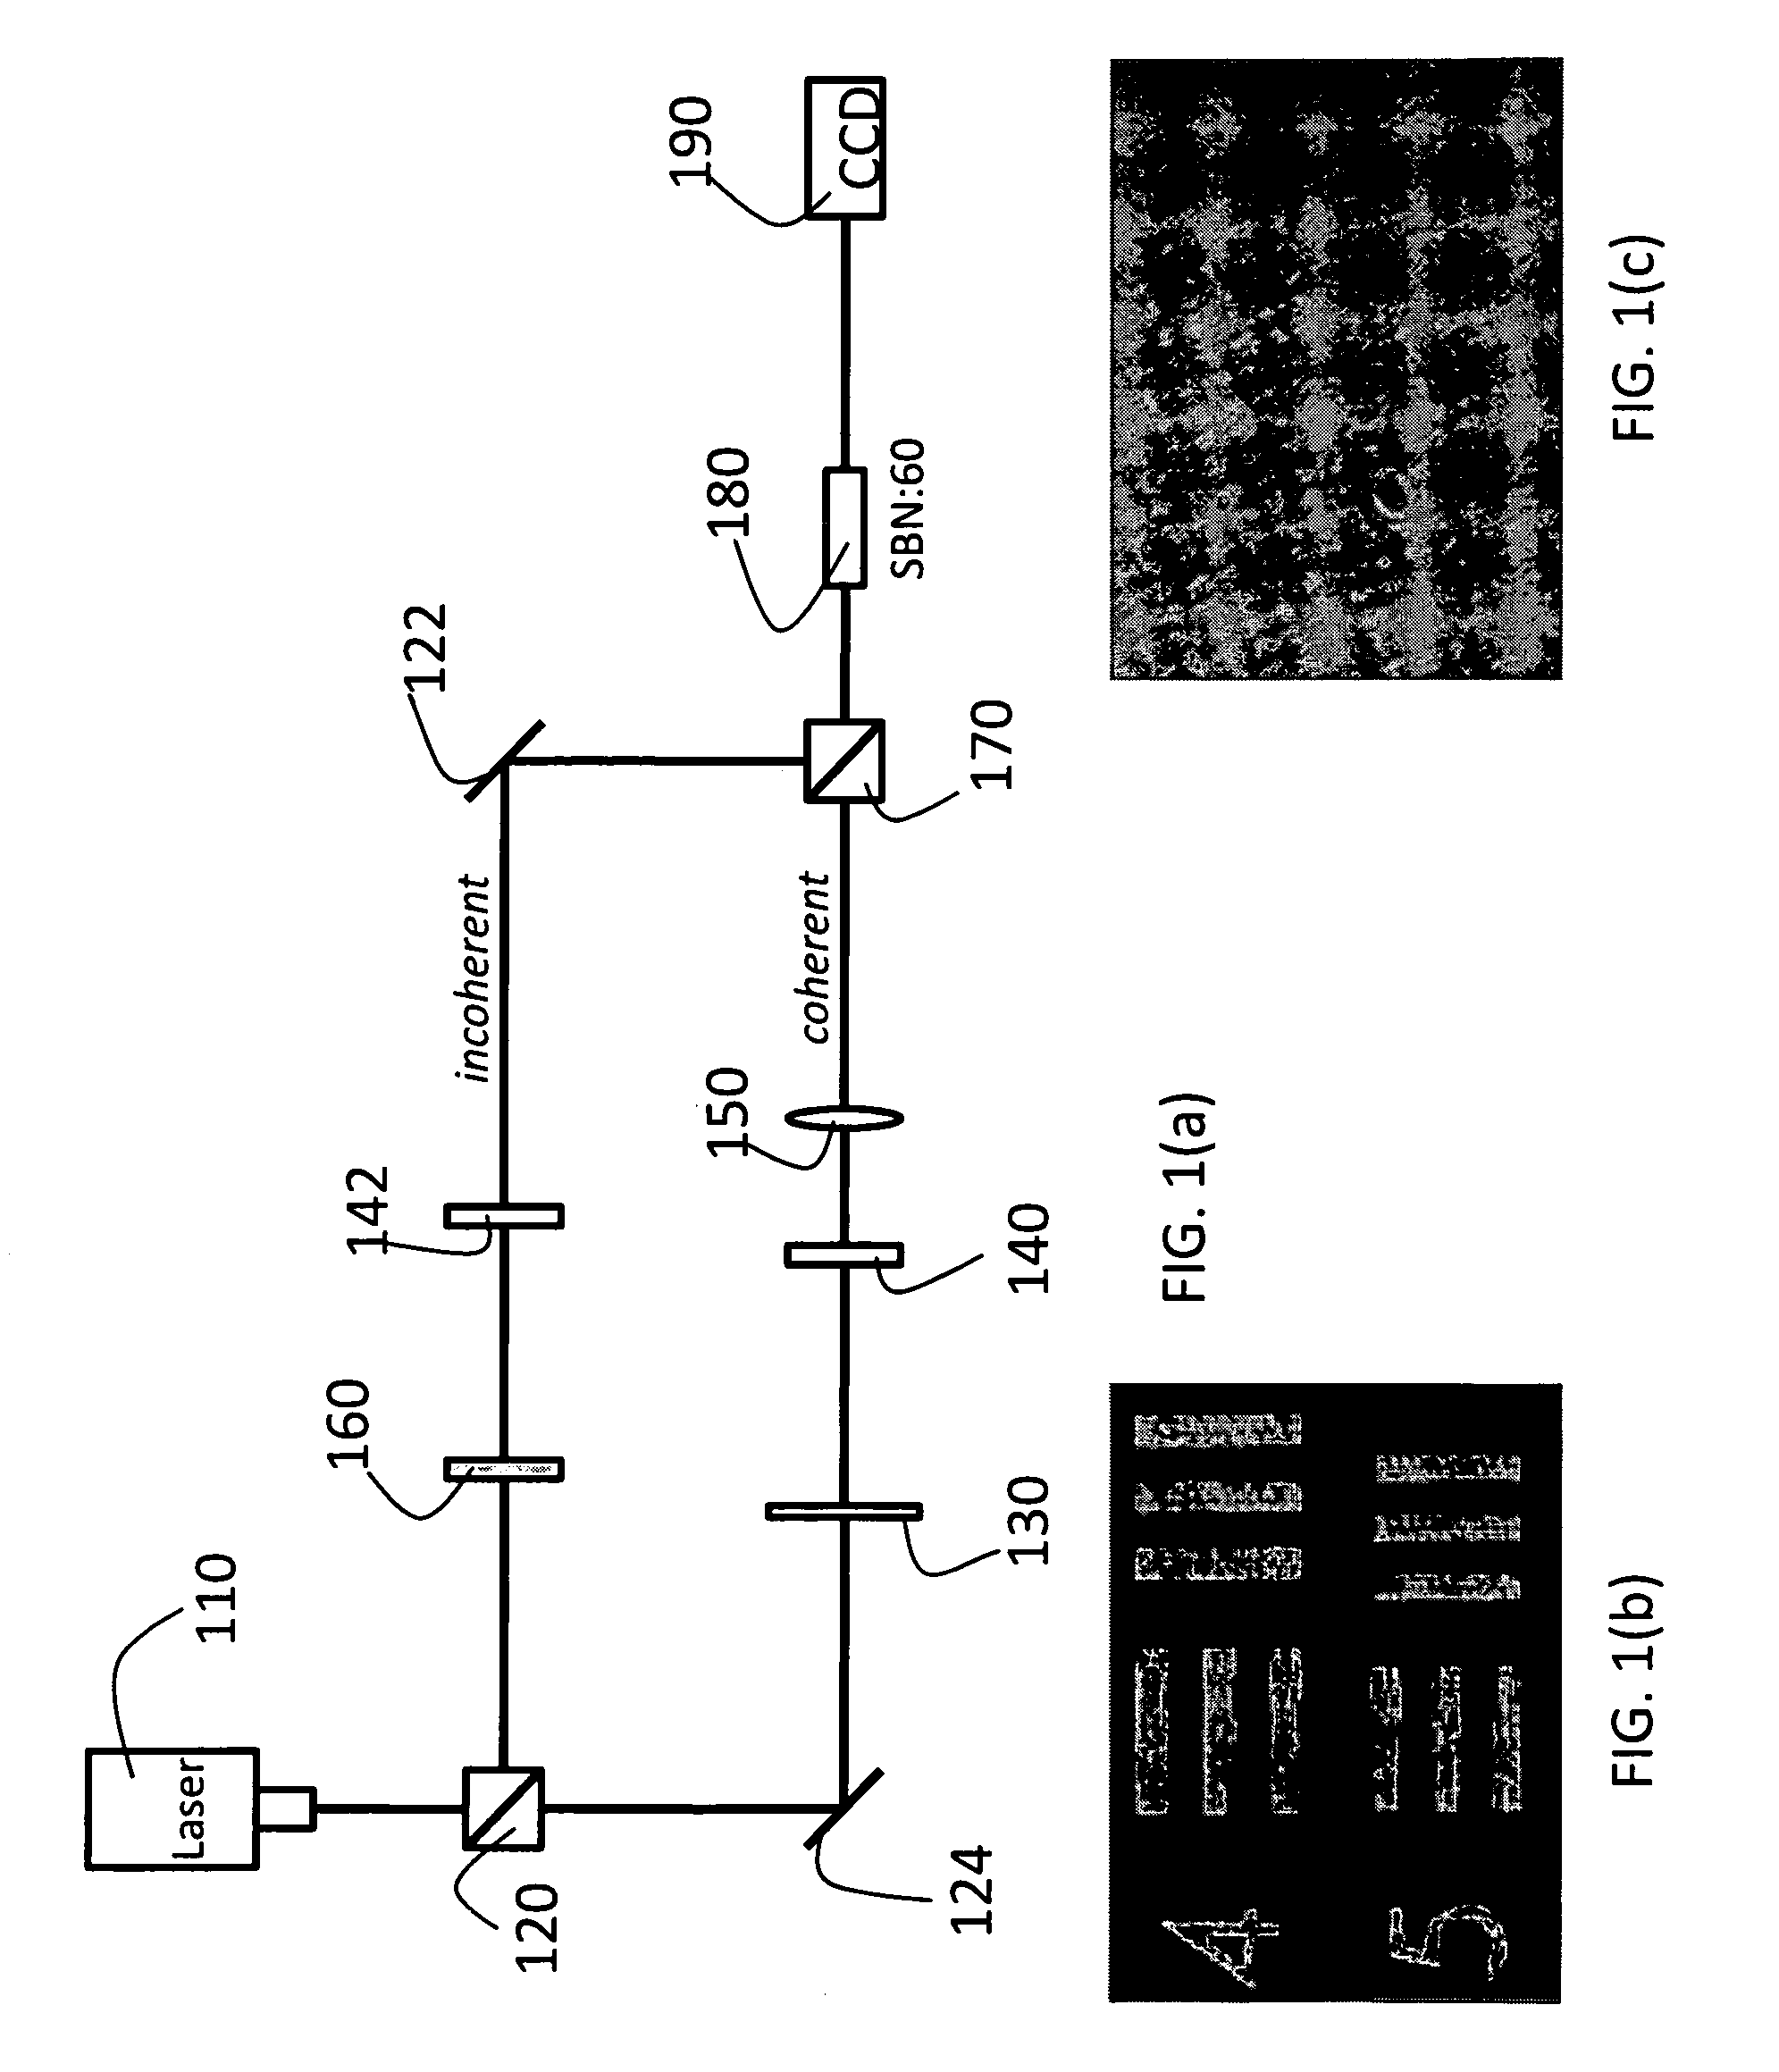 System and method for nonlinear self-filtering via dynamical stochastic resonance